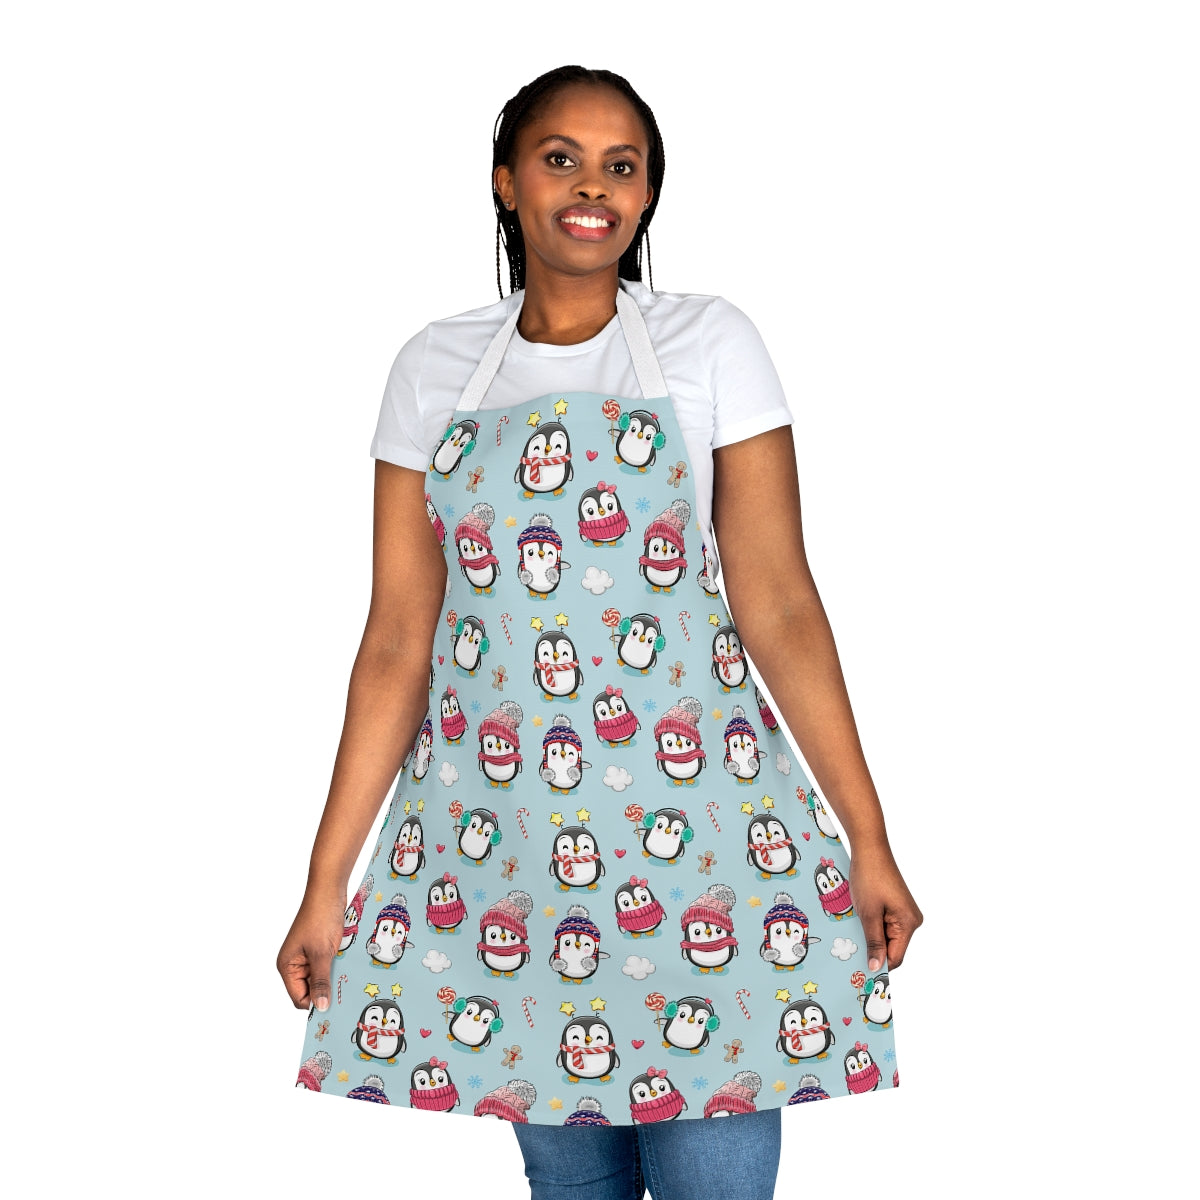 Penguins in Winter Clothes Apron